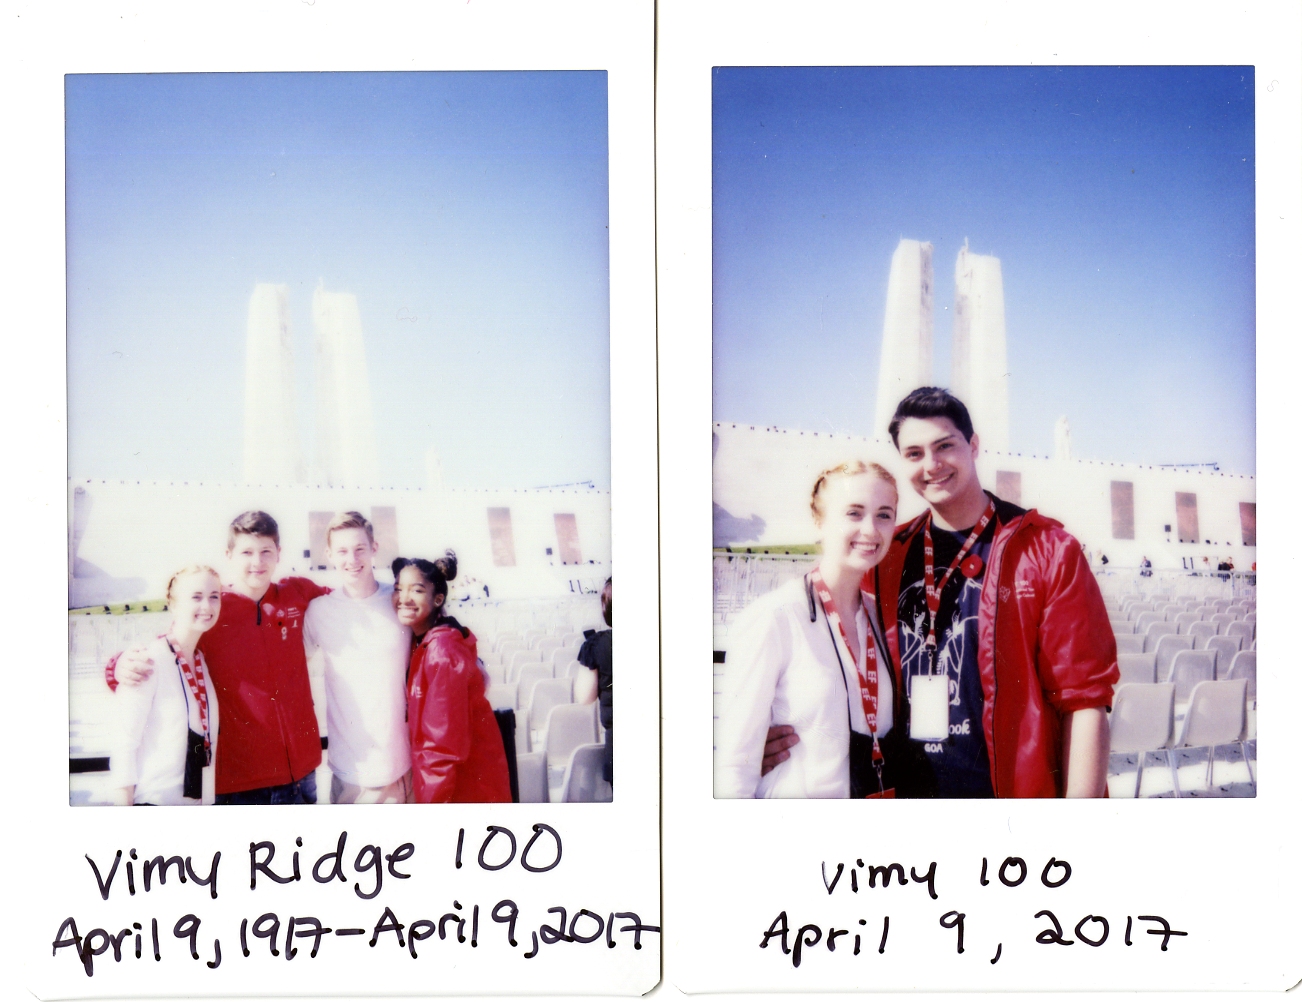 Two snapshot photos of students at the Vimy Ridge Memorial in 2017